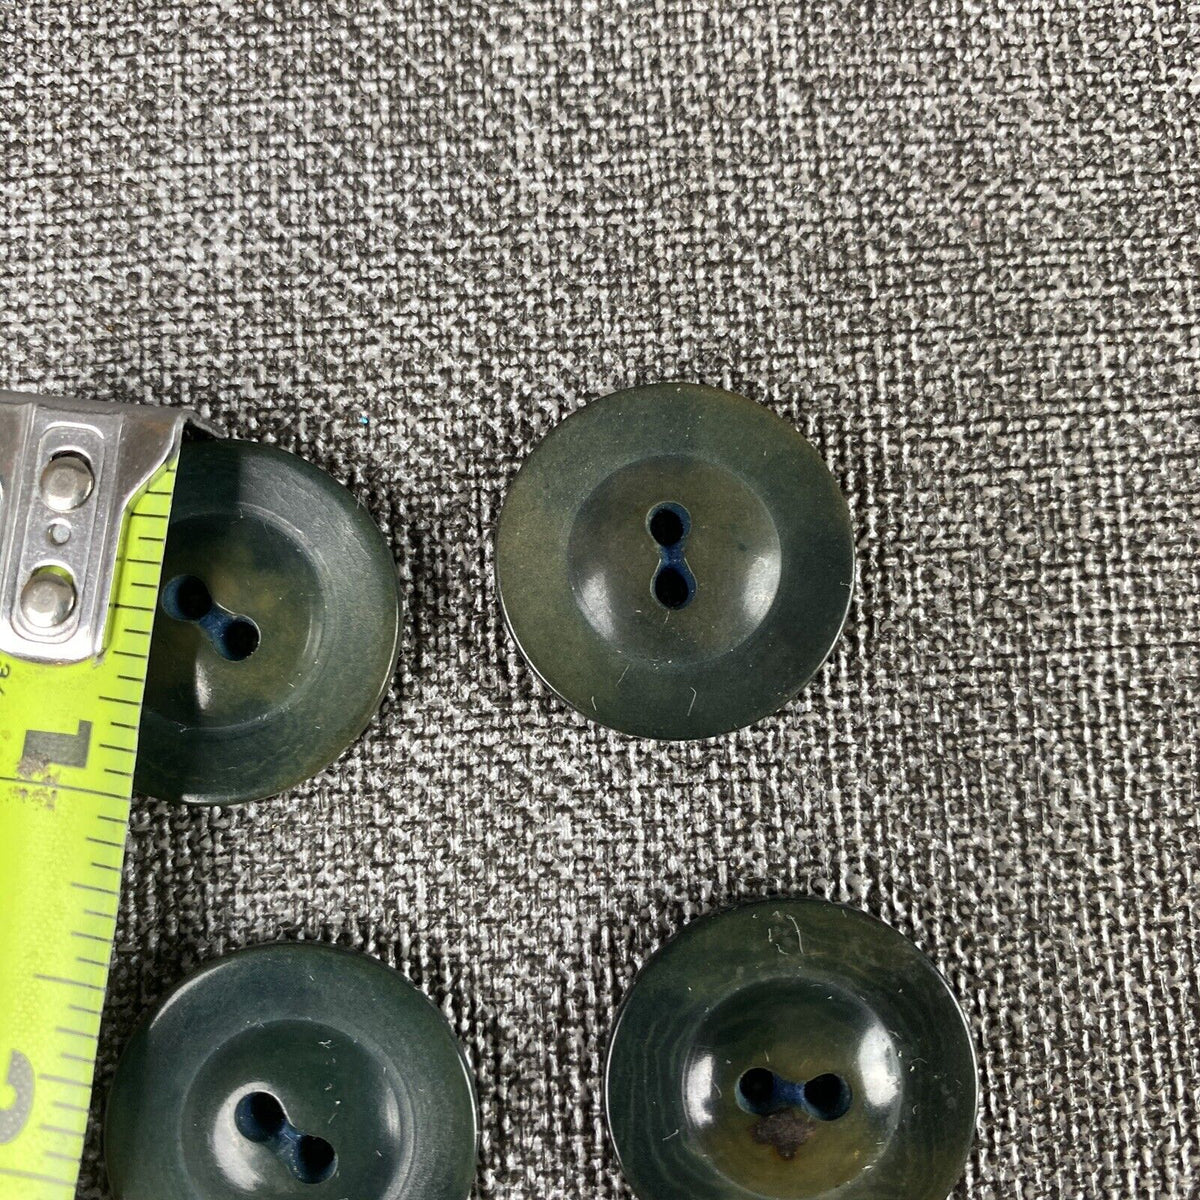 Lot of 15 Vintage Bakelite Buttons: Different Styles